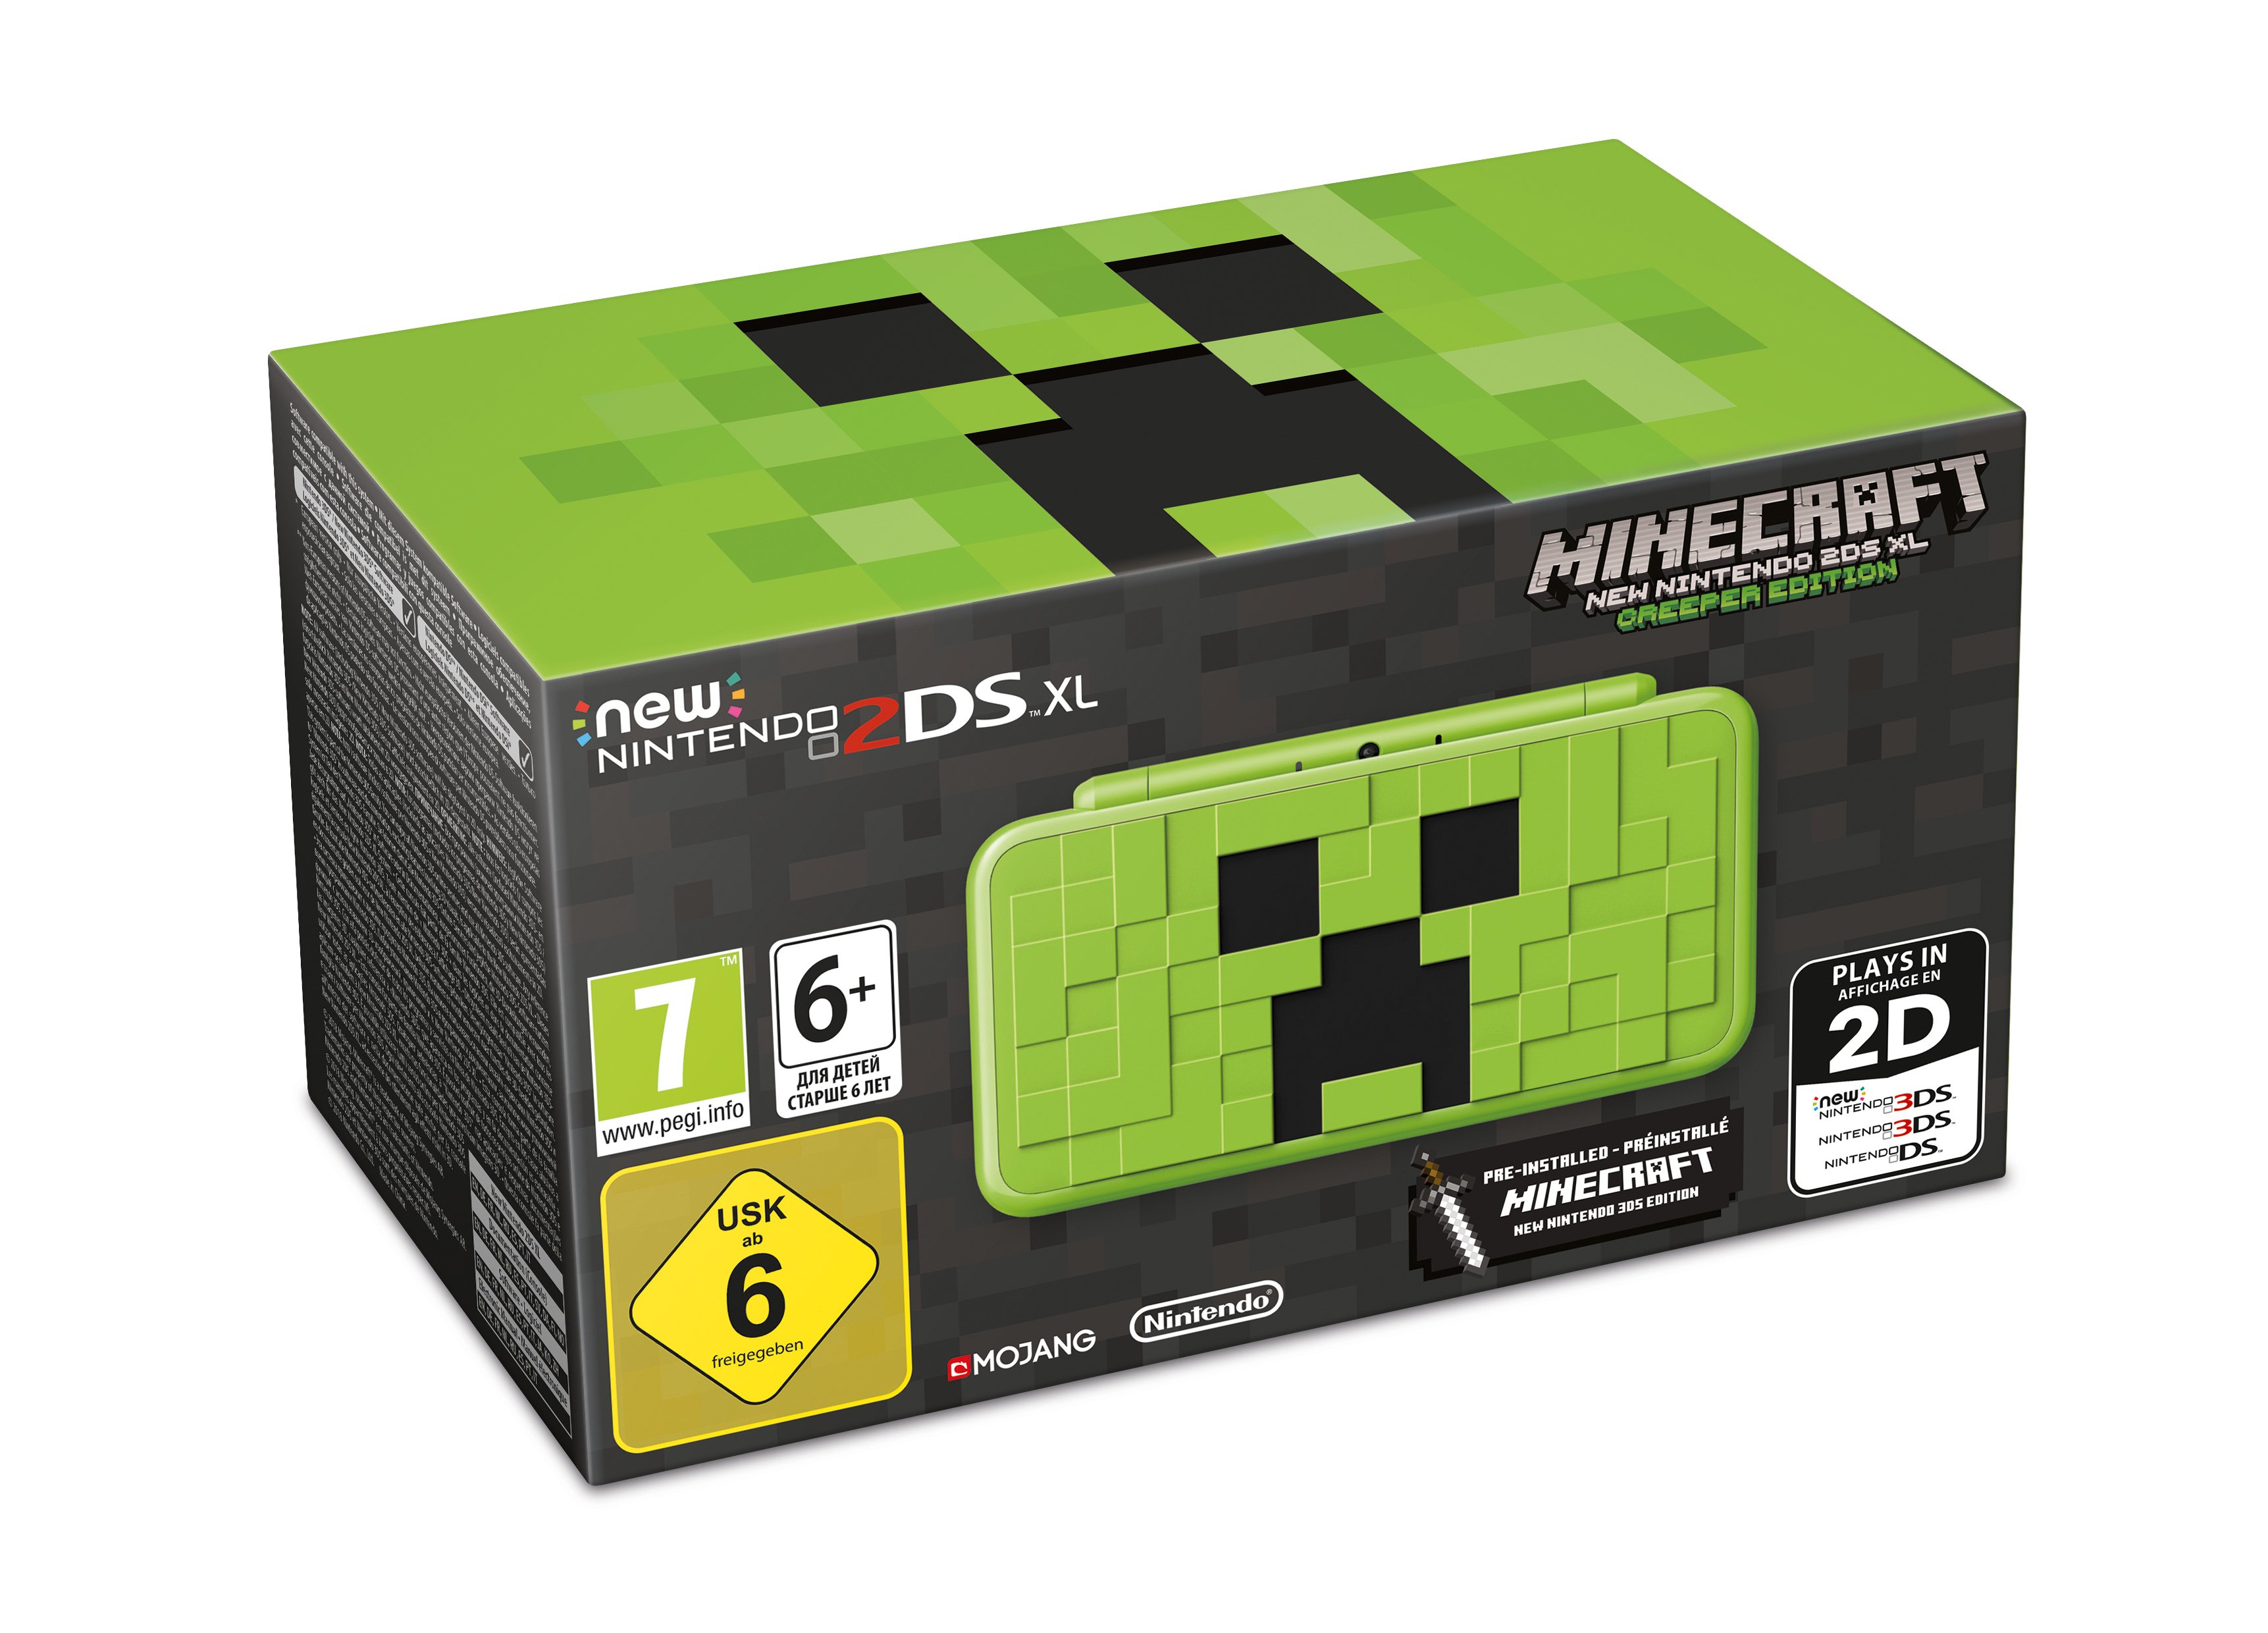 new 2ds xl creeper edition